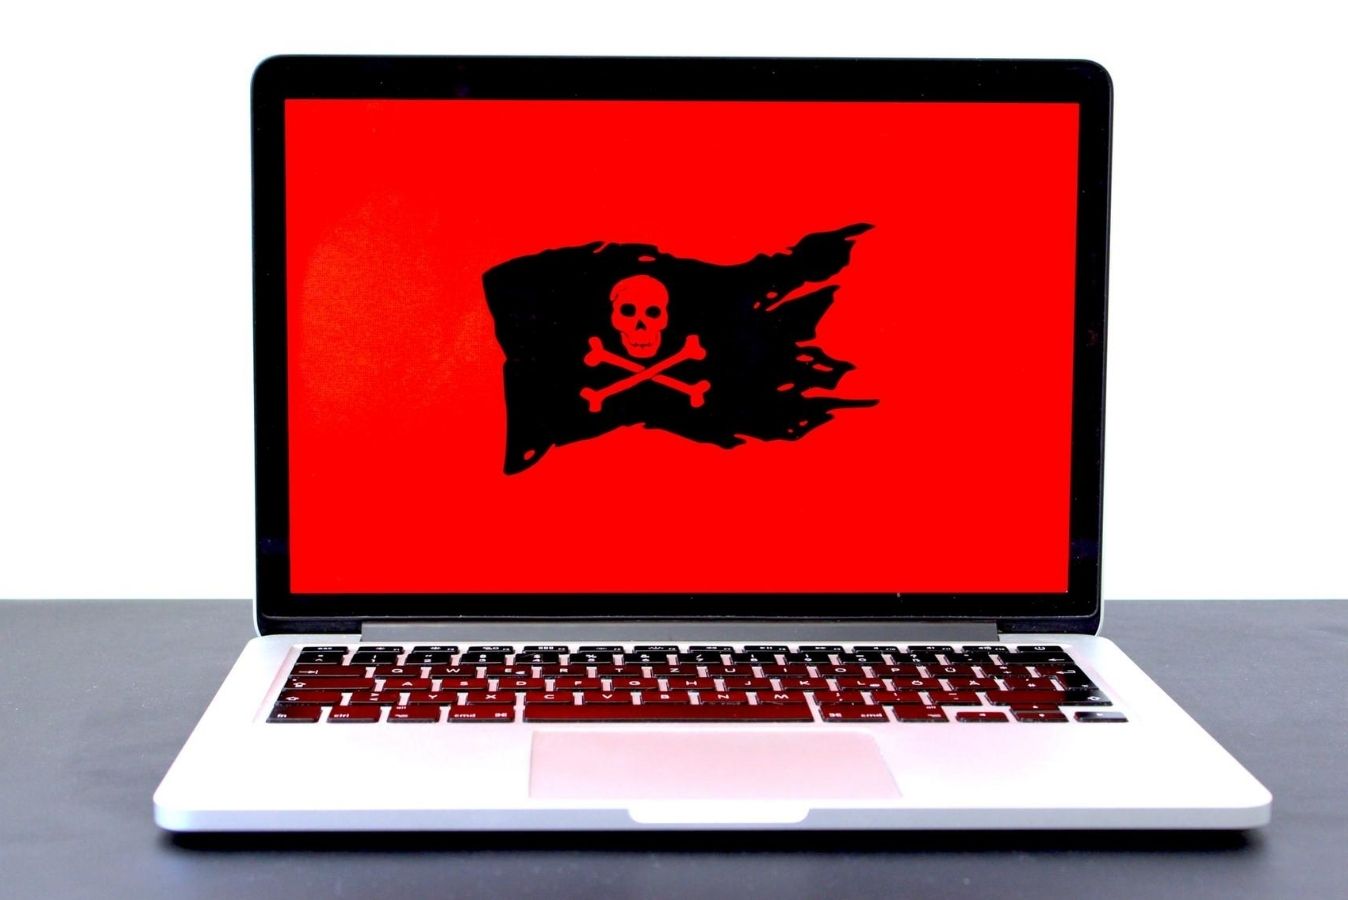 How to Identify If Ransomware Infected Your Computer